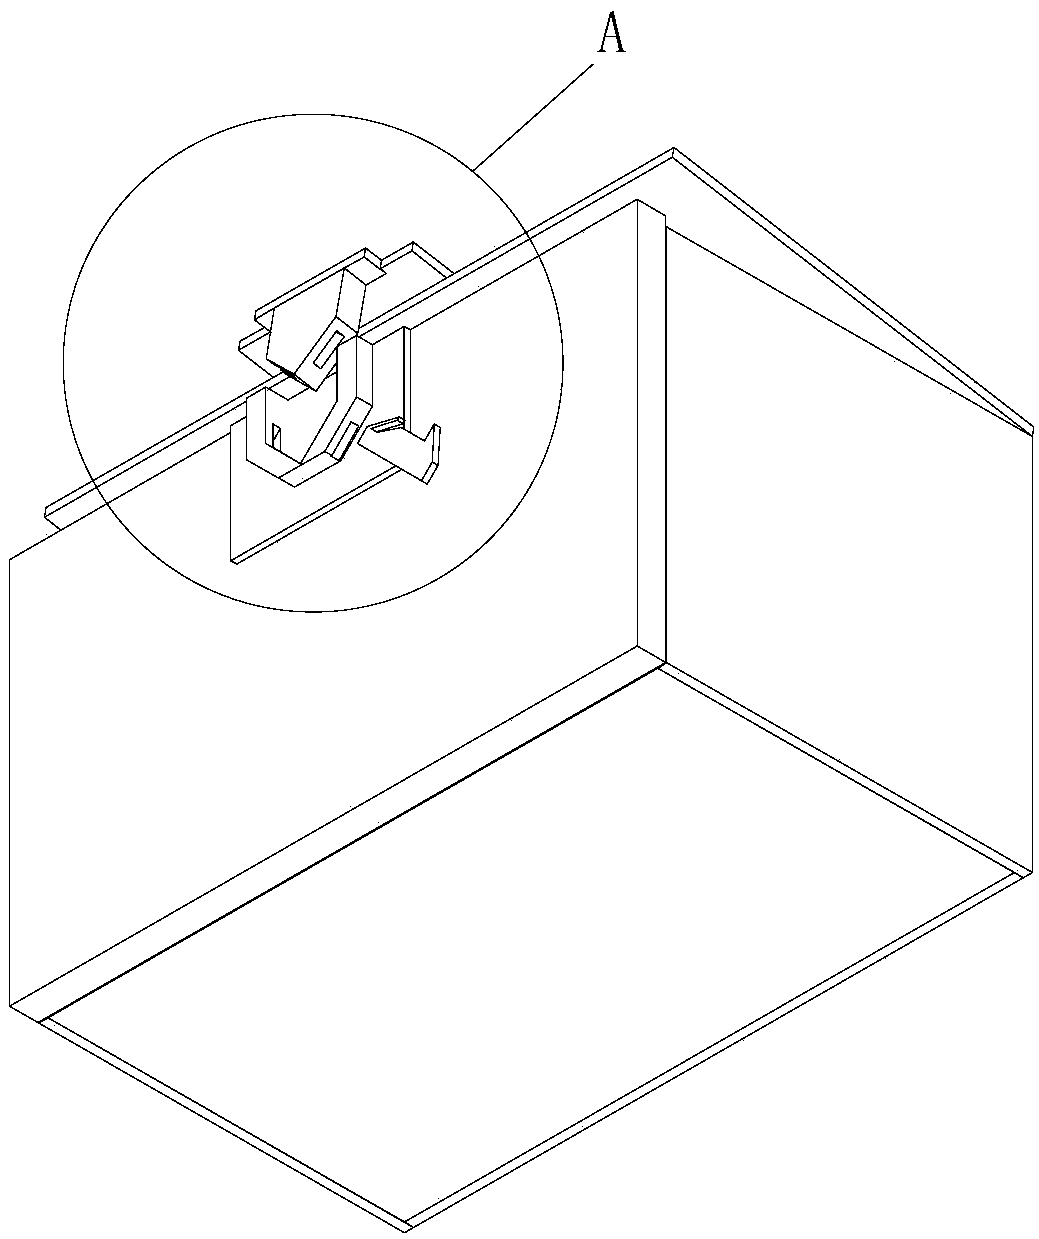 Operation method based on recyclable express packaging box